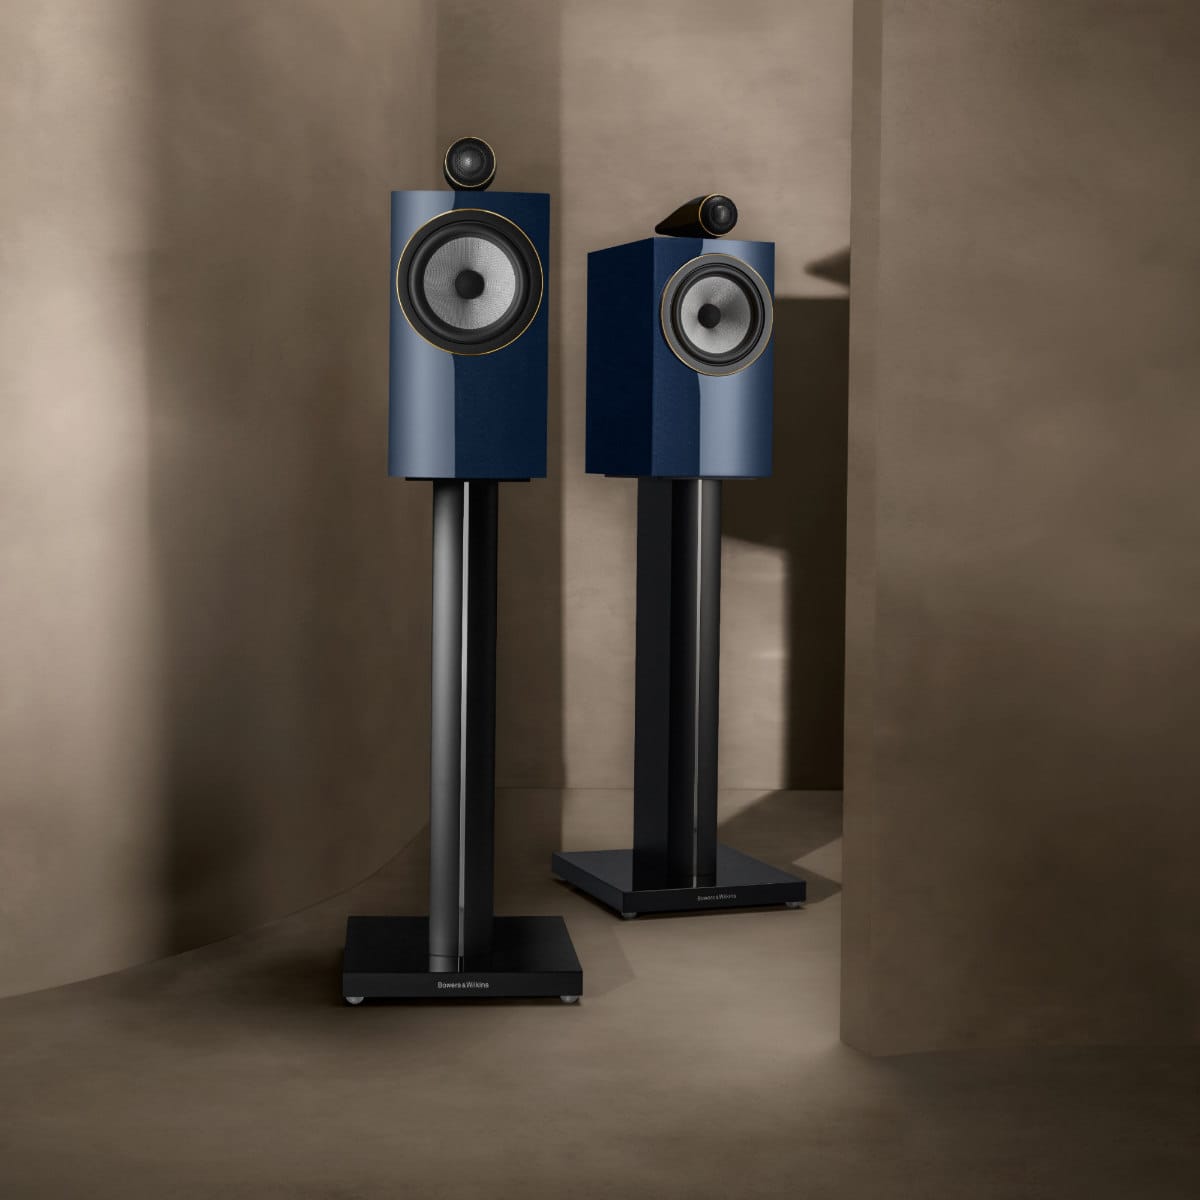 Bowers & Wilkins calls its new 700 S3 Signature the ultimate version of the 700 series